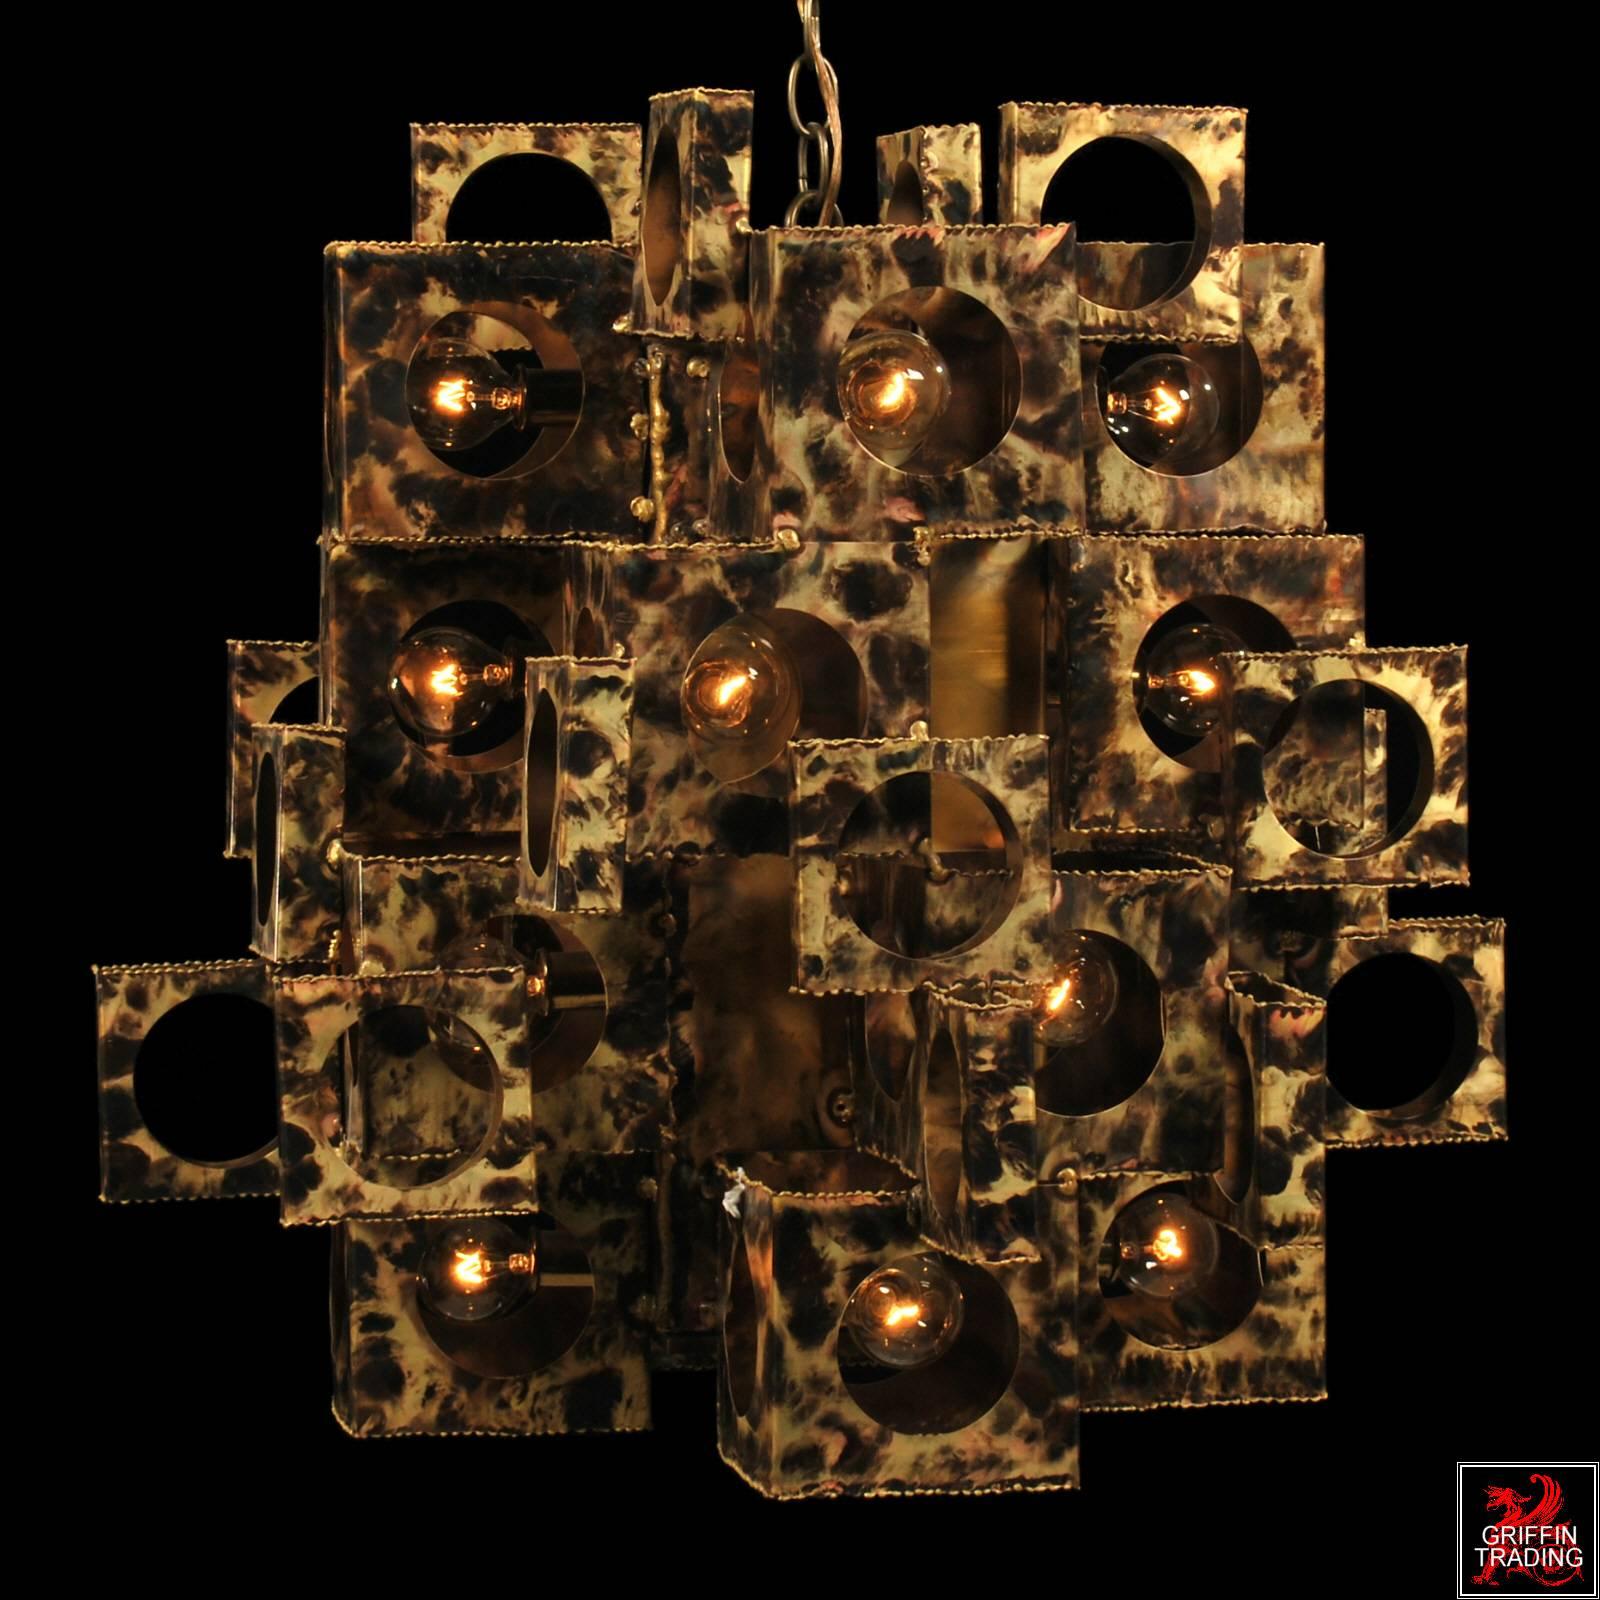 Here is another spectacular Brutalist chandelier by designer Tom Greene. This is one of the more rare forms with its unique cubist style. He used various sizes of torch cut boxes, which are layered and stair-stepped to create this dramatic